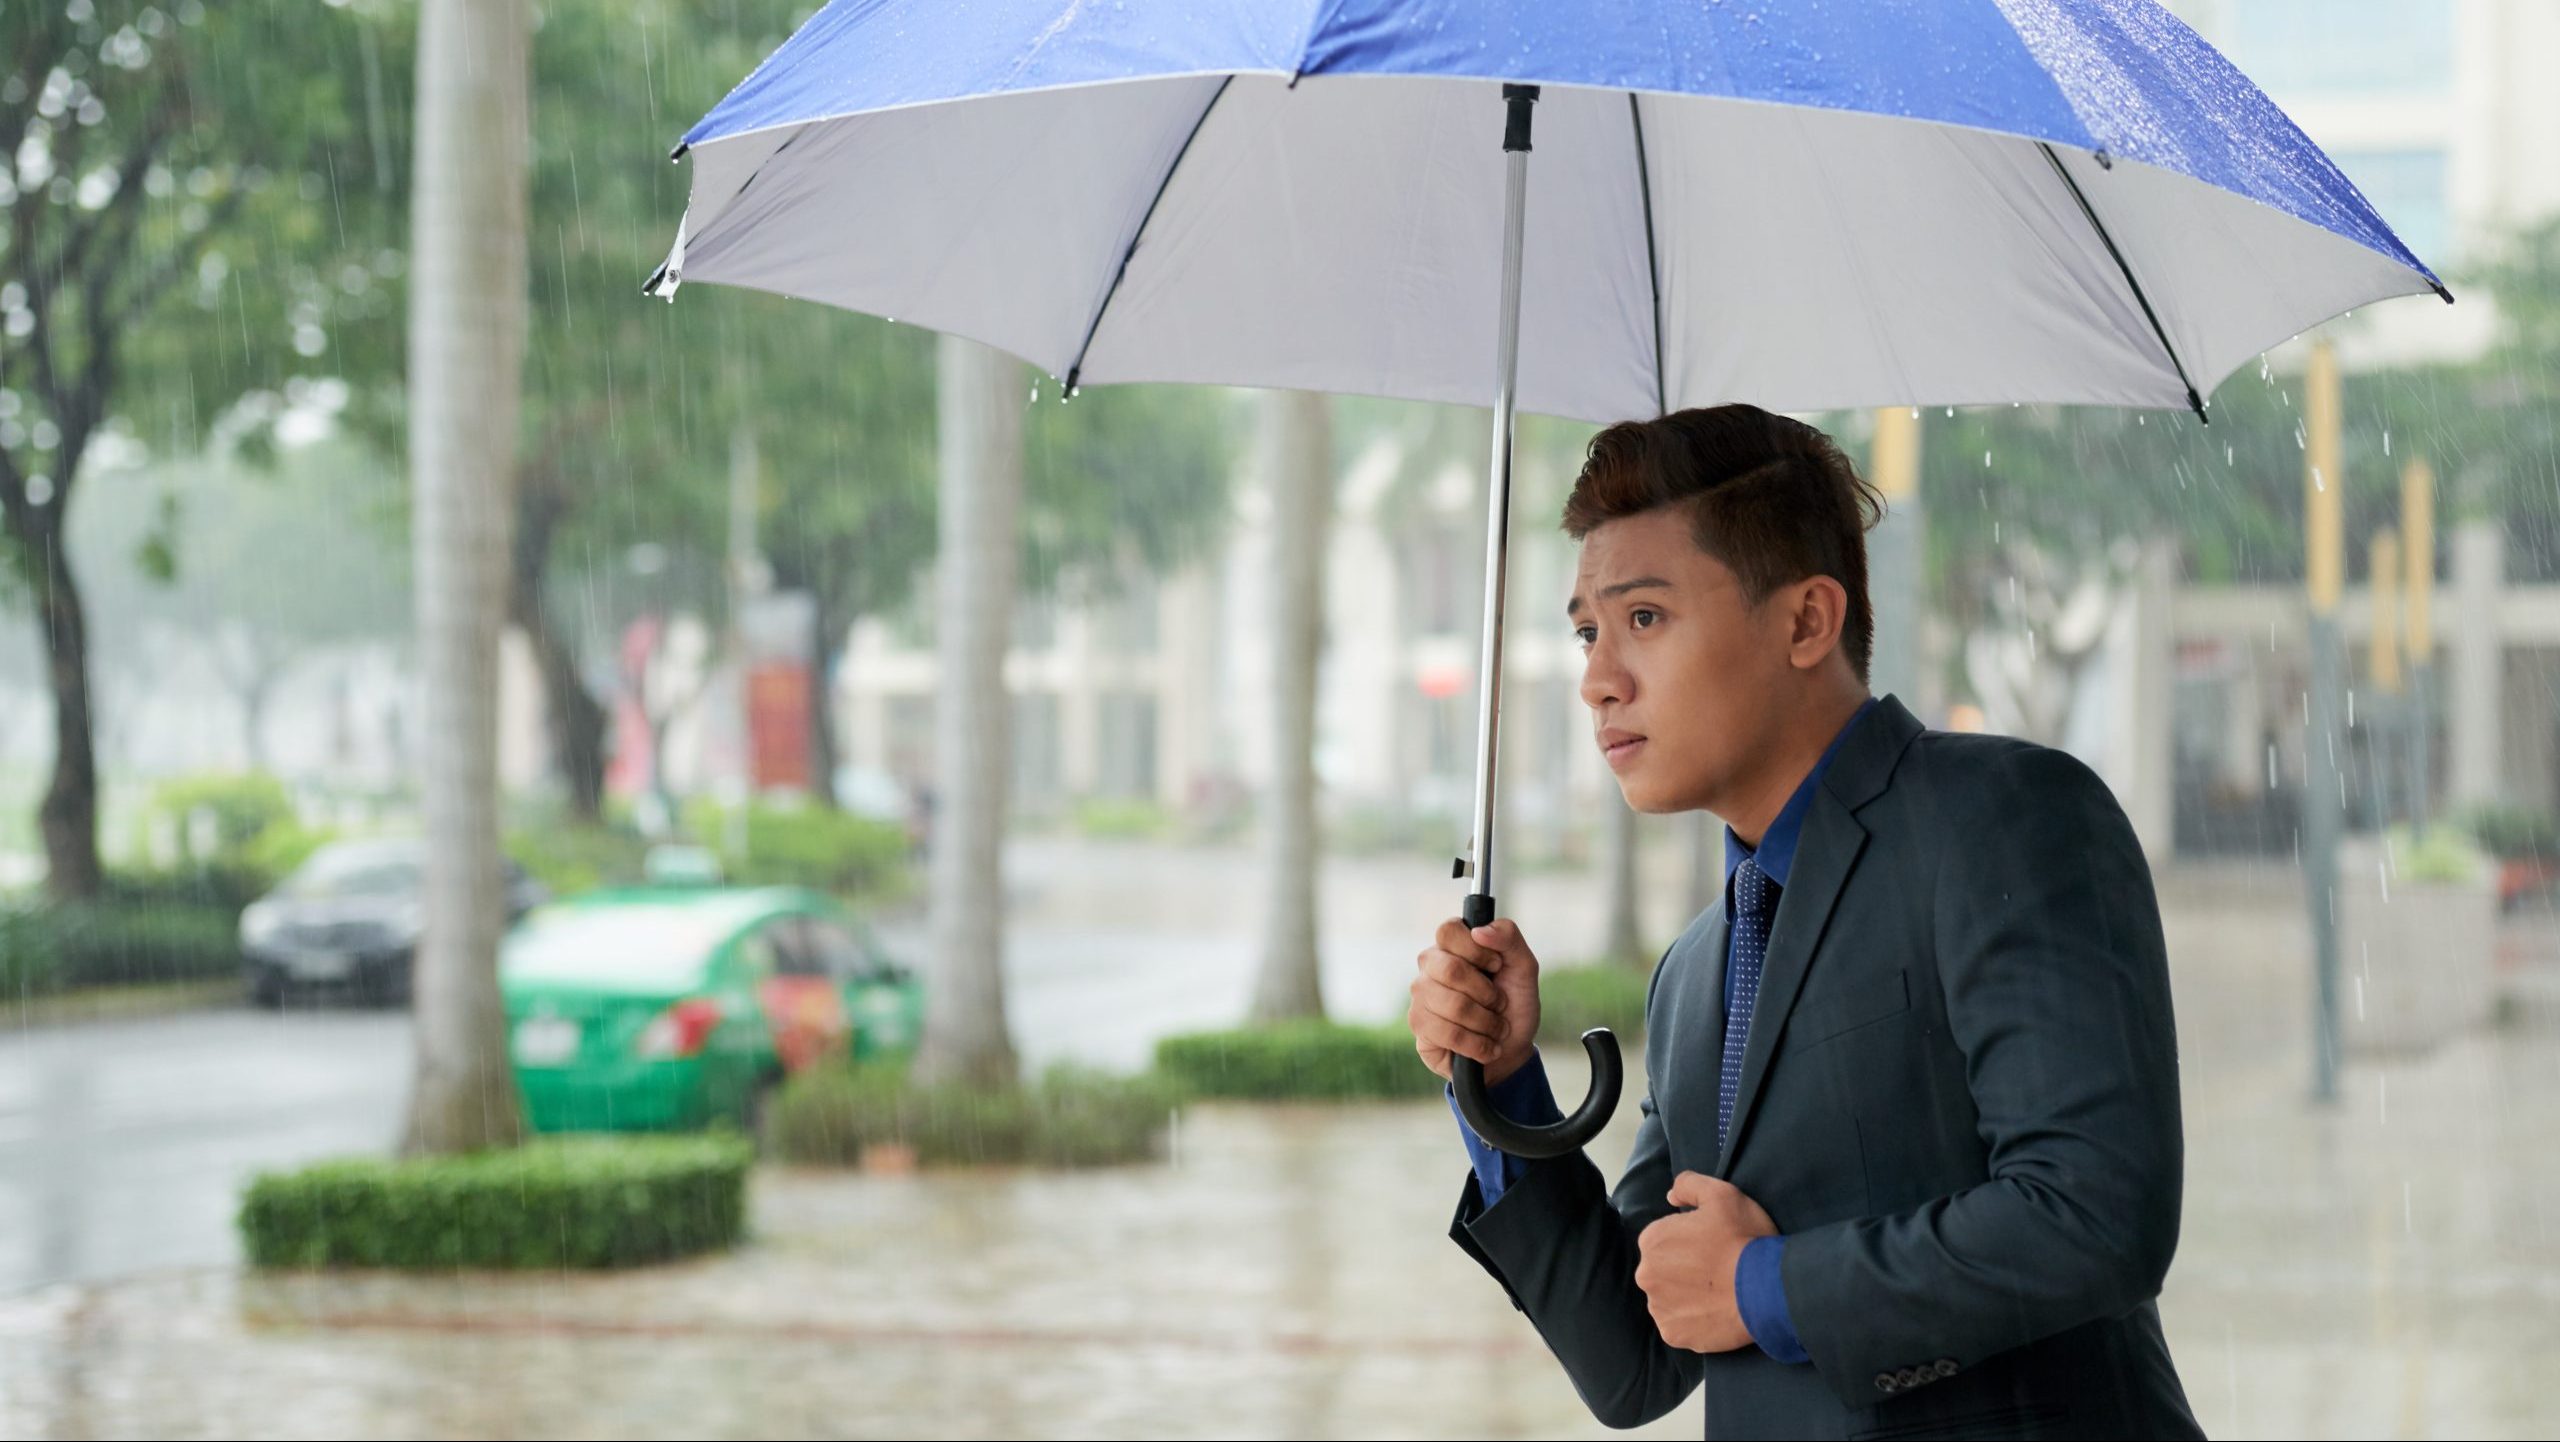 Man in a business suit holding an umbrella in rainy weather.